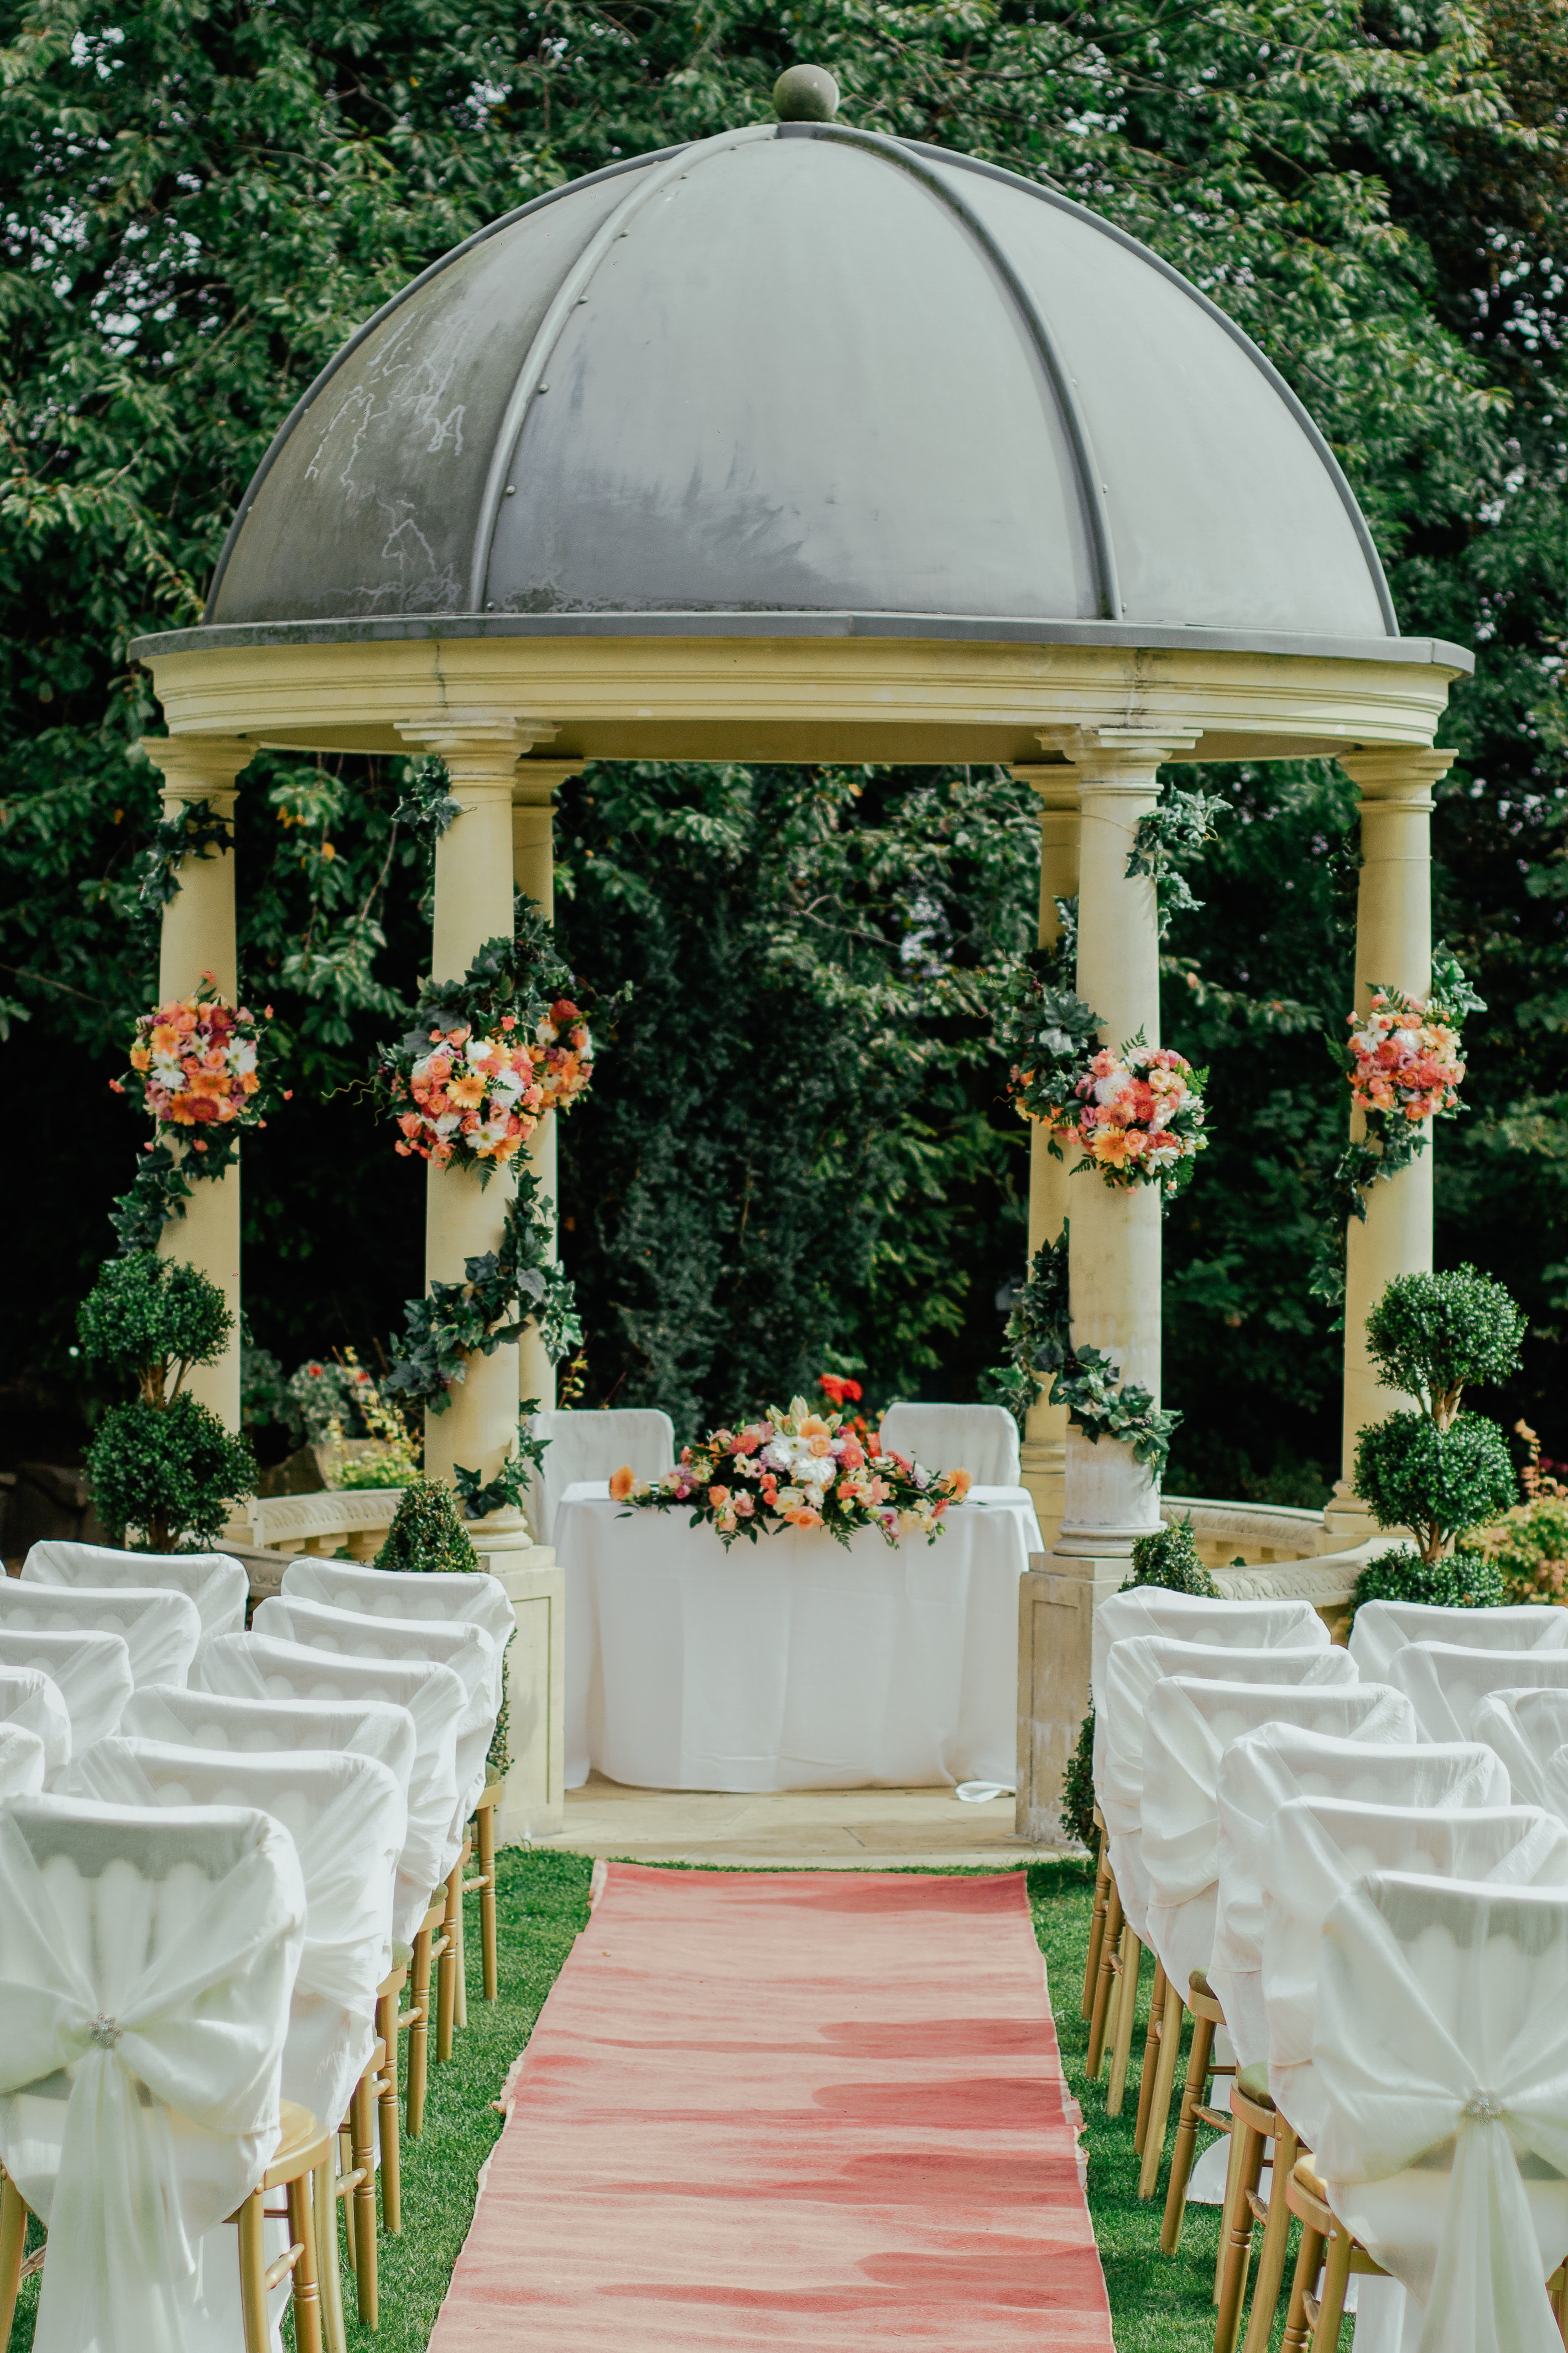 Image of wedding setup with chairs, flowers and alter